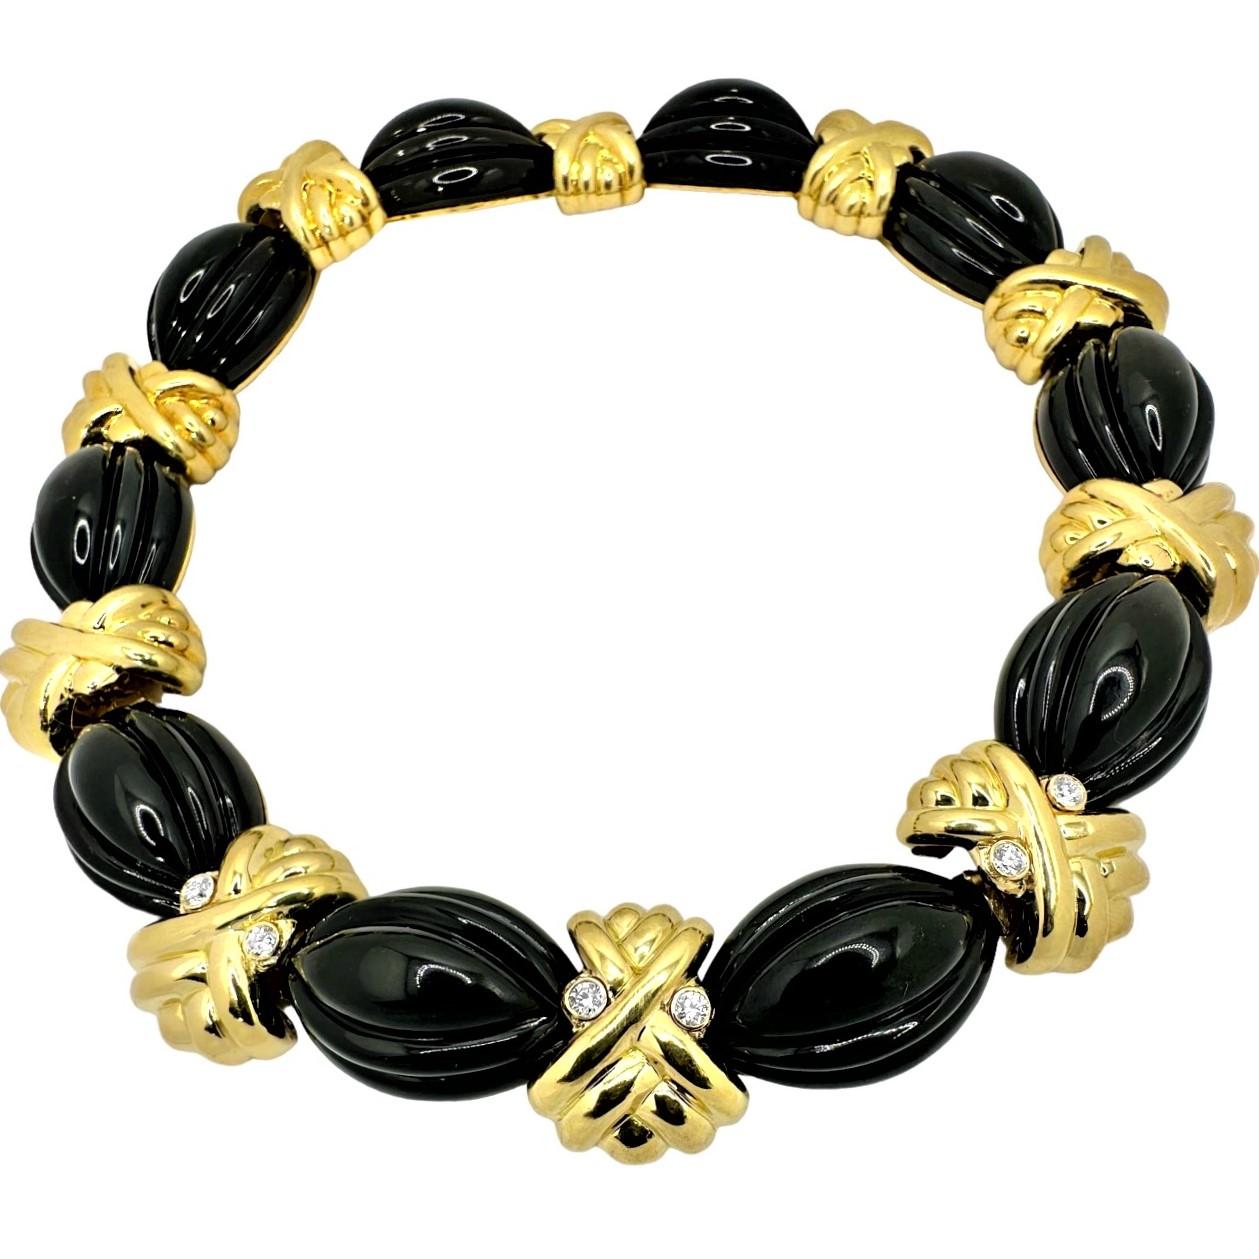 This striking 18k yellow gold and fluted, black onyx cocktail necklace is a creation of the very highly regarded New York jewelry manufacturer, Hammerman Brothers.  This necklace has a continuous length of billowing black onyx cabochons connected by